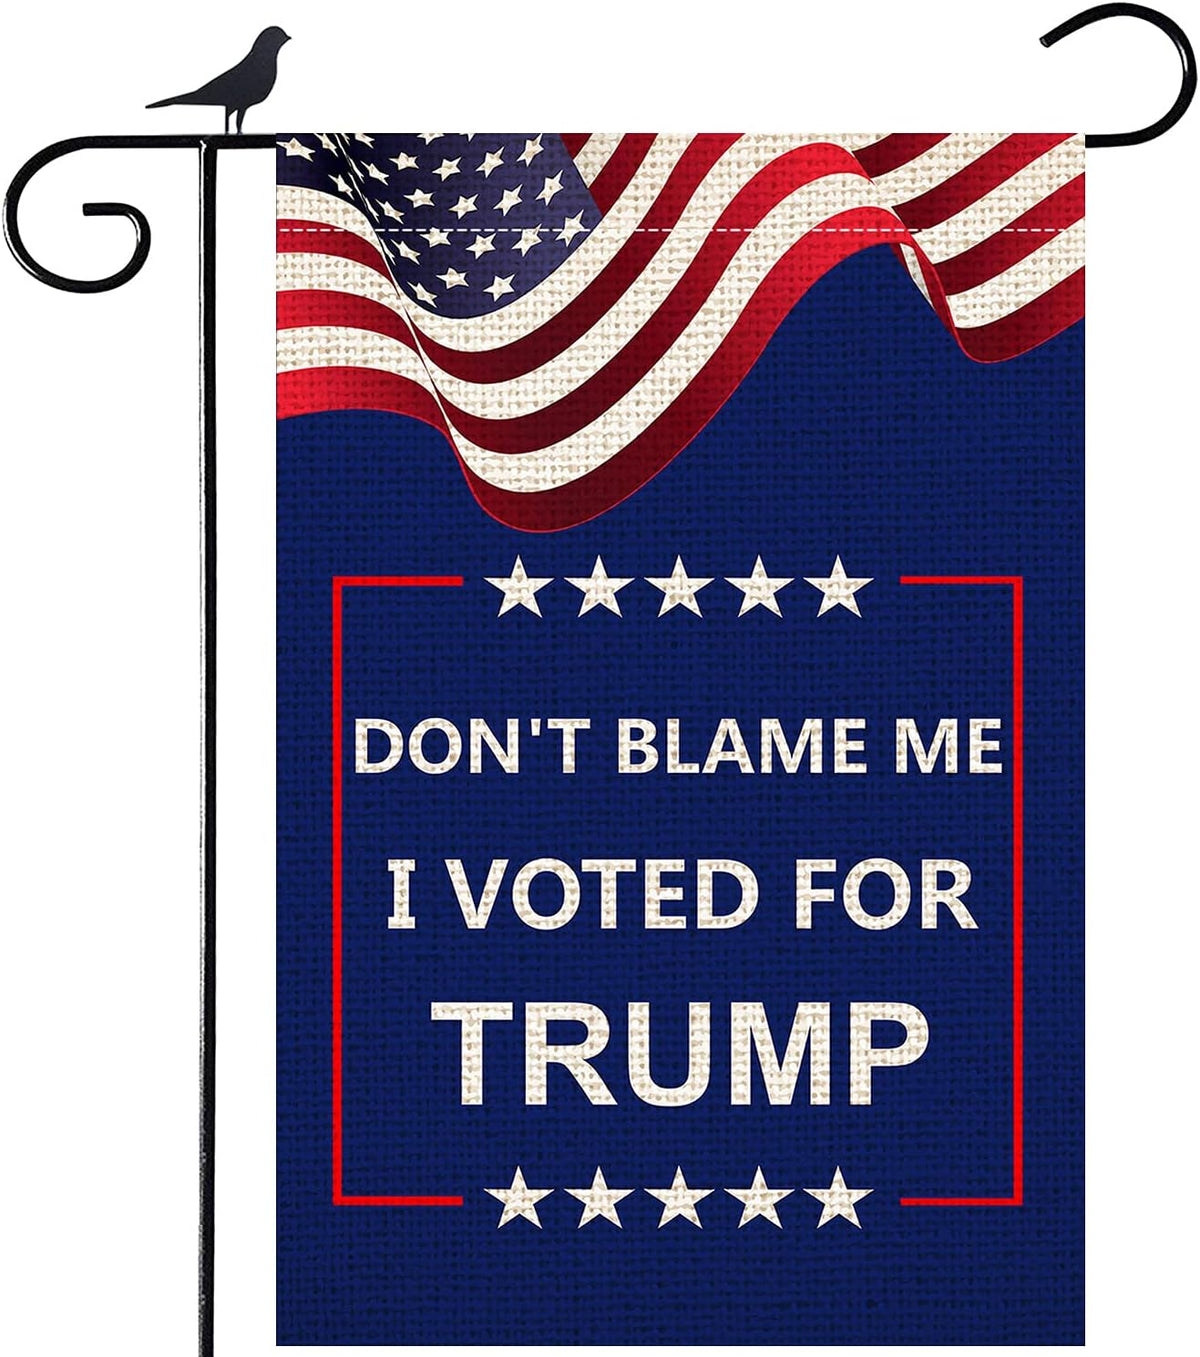 Shmbada Don't Blame Me I Voted for Trump Garden Flag Burlap Double Sided Vertical Outdoor Decorative Flag for Home Garden Yard Lawn Patio Farmhouse 12.5 x 18.5 Inch